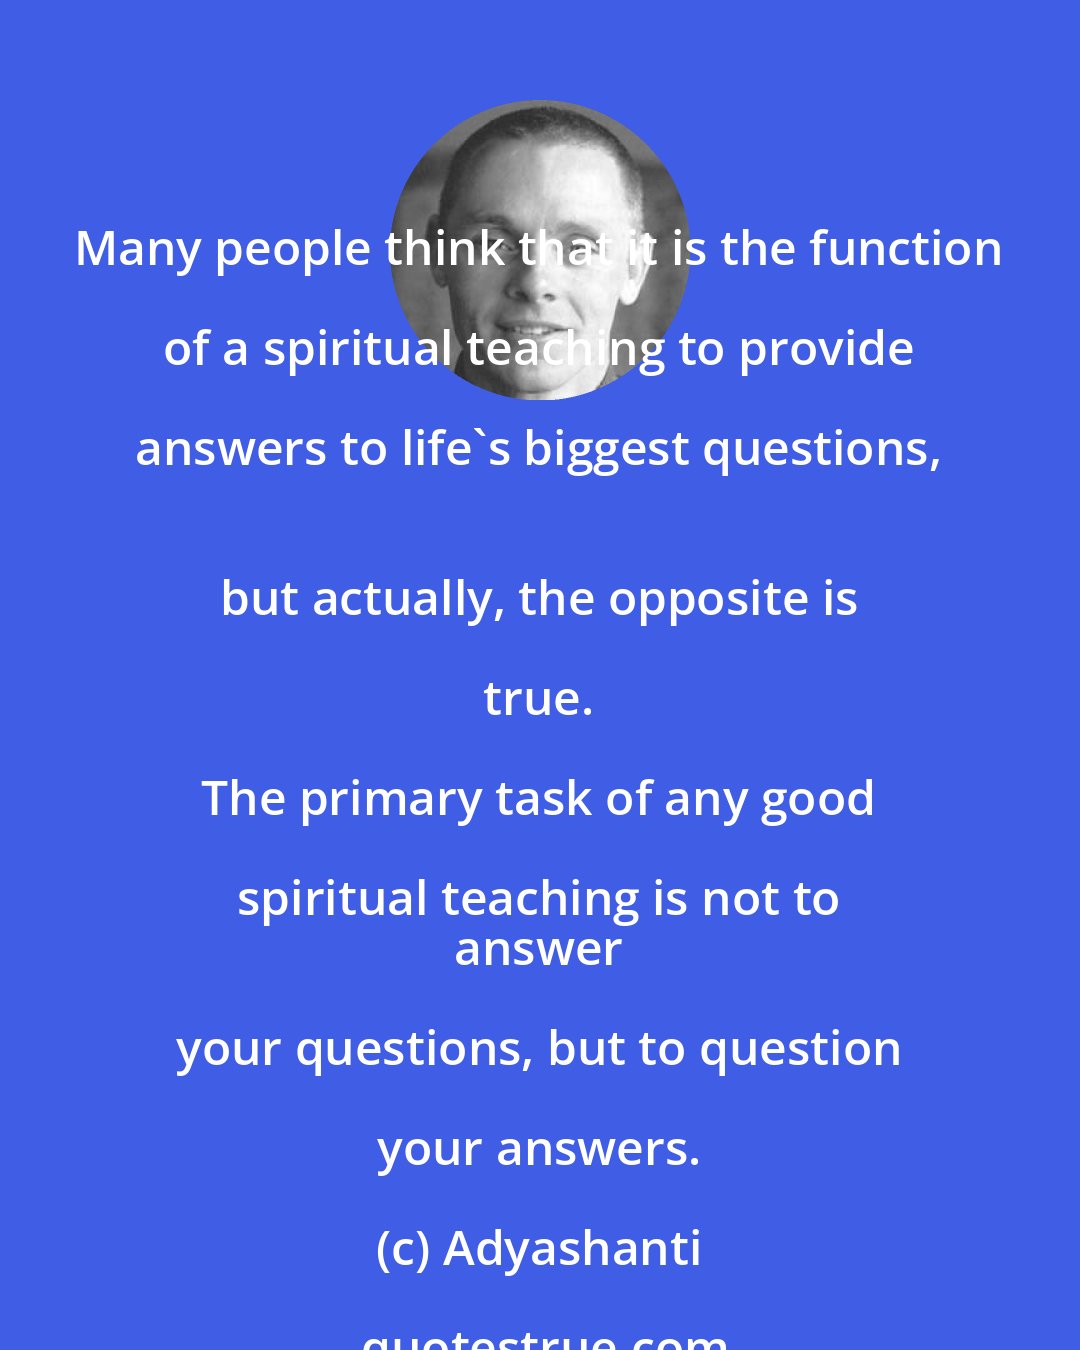 Adyashanti: Many people think that it is the function of a spiritual teaching to provide answers to life's biggest questions, 
 but actually, the opposite is true. 
 
 The primary task of any good spiritual teaching is not to 
 answer your questions, but to question your answers.